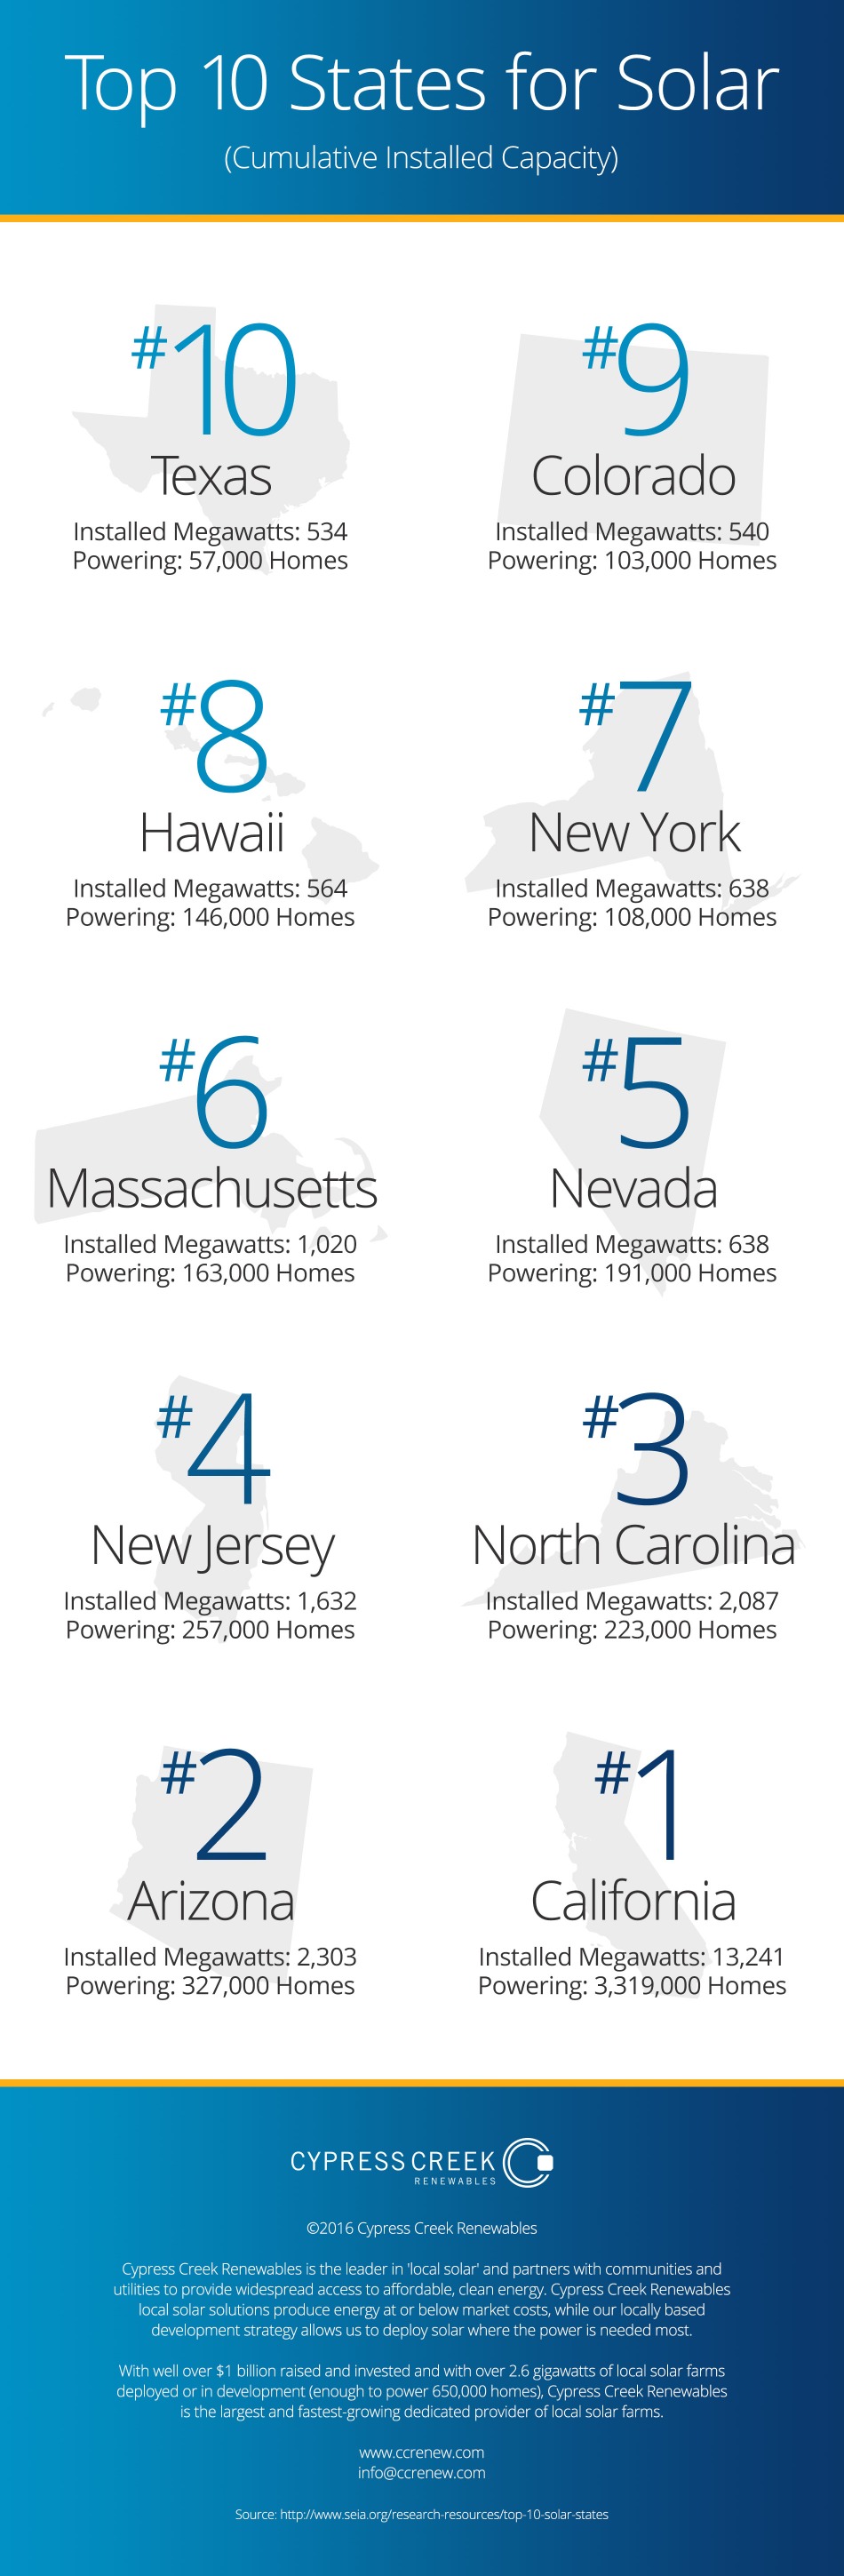 Top-10-States-Infographic-I.jpg